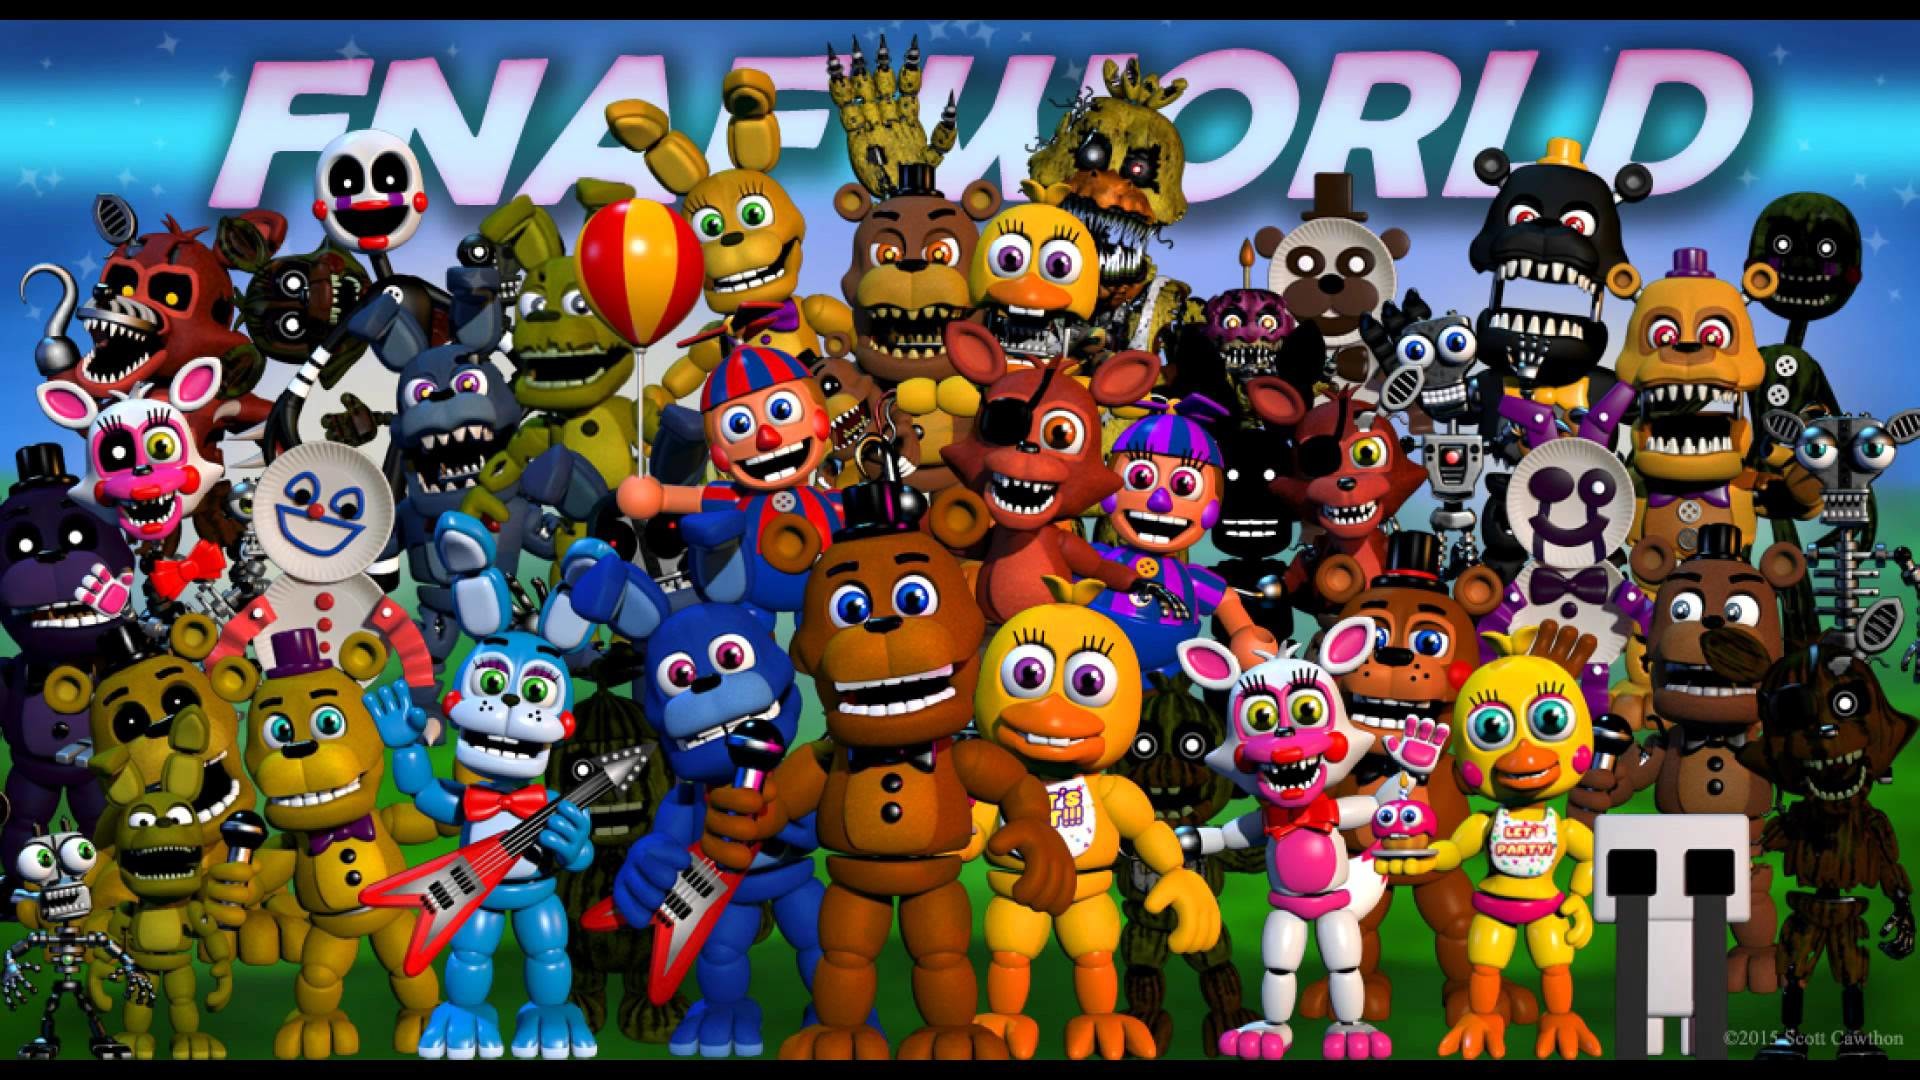 1920x1080 Five nights at Freddys favourites by Nevert013 on DeviantArt